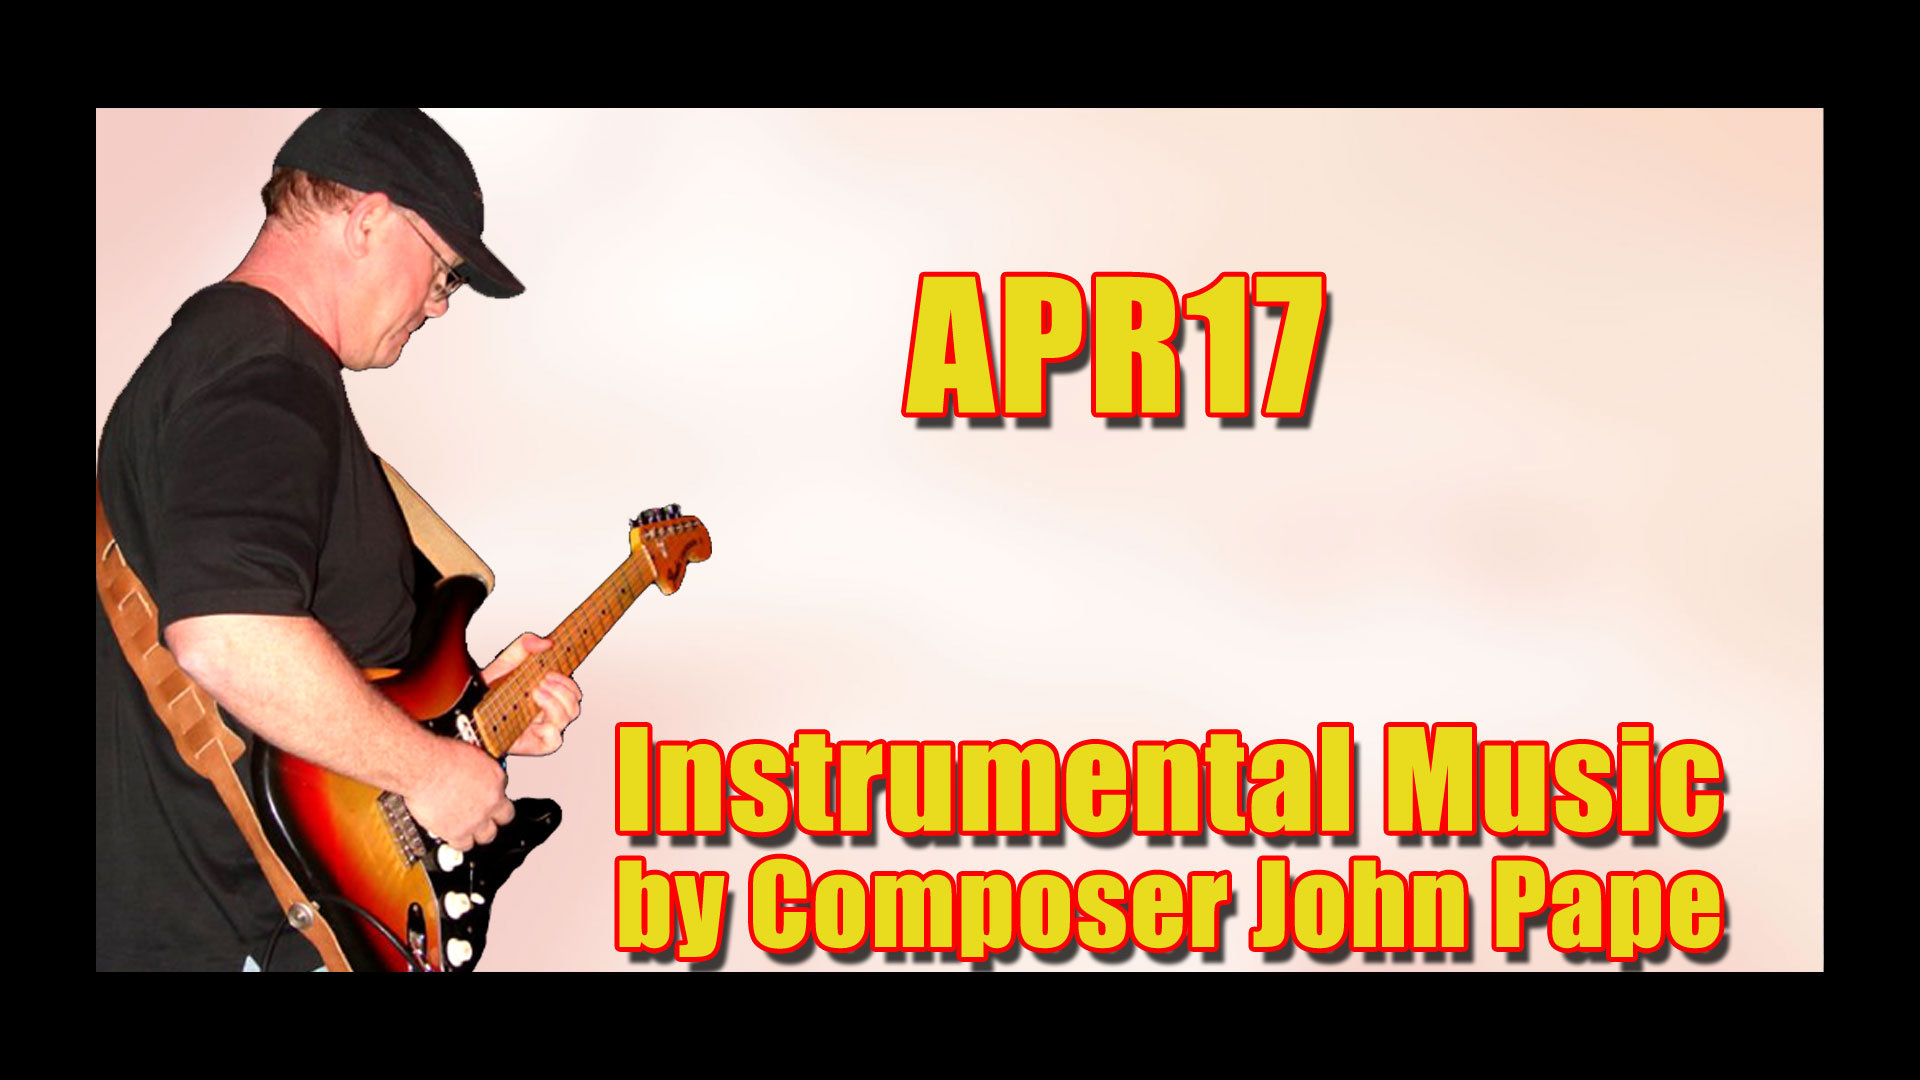 APR 17: A Captivating Musical Journey by John Pape